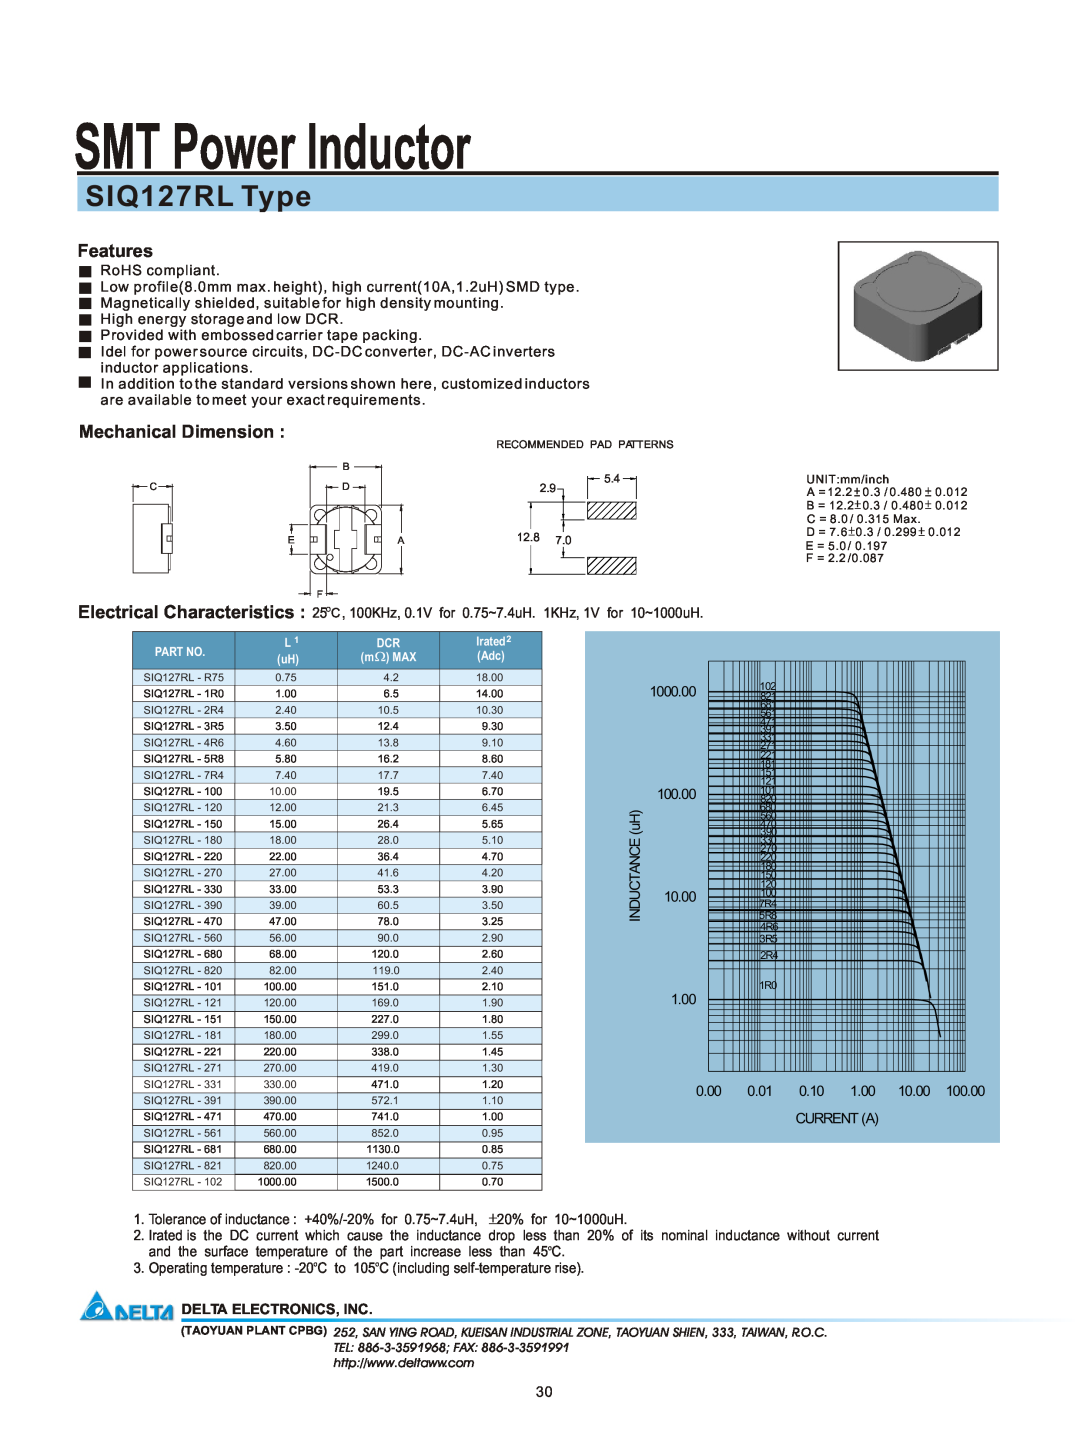 Delta Electronics manual SMT Power Inductor, SIQ127RL Type, Features, Mechanical Dimension, Delta Electronics, Inc 